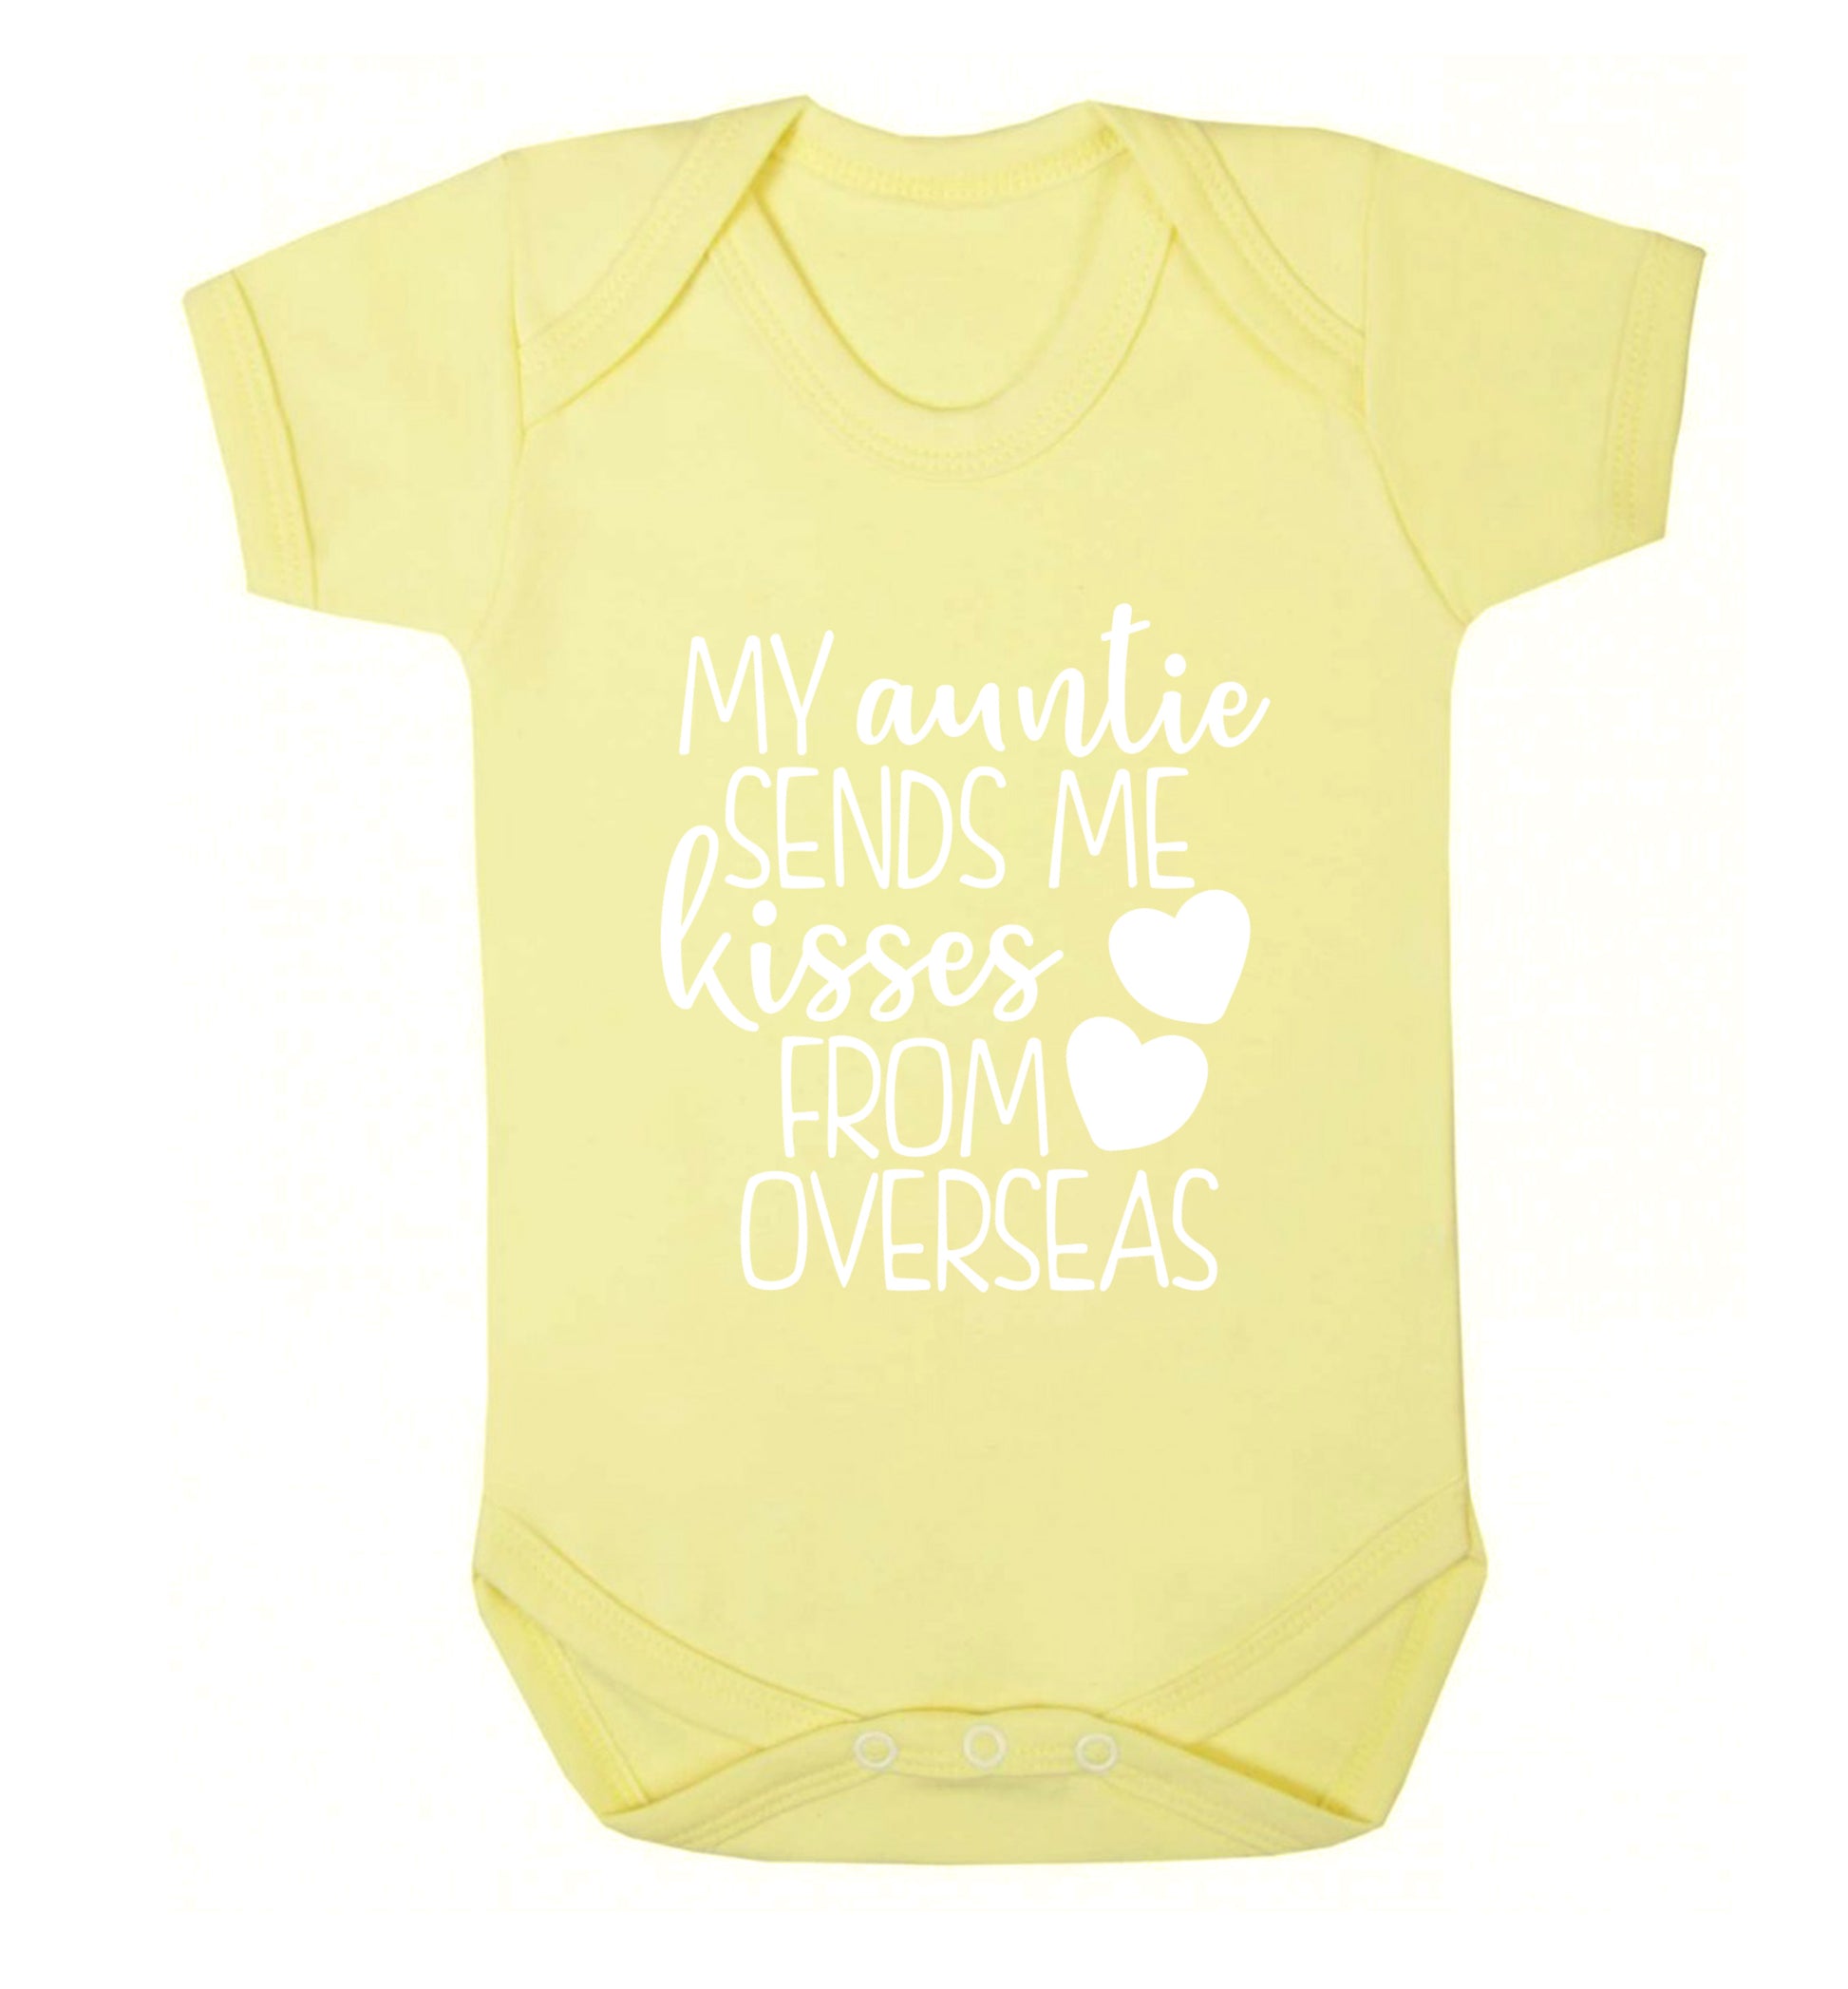 My auntie sends me kisses from overseas Baby Vest pale yellow 18-24 months